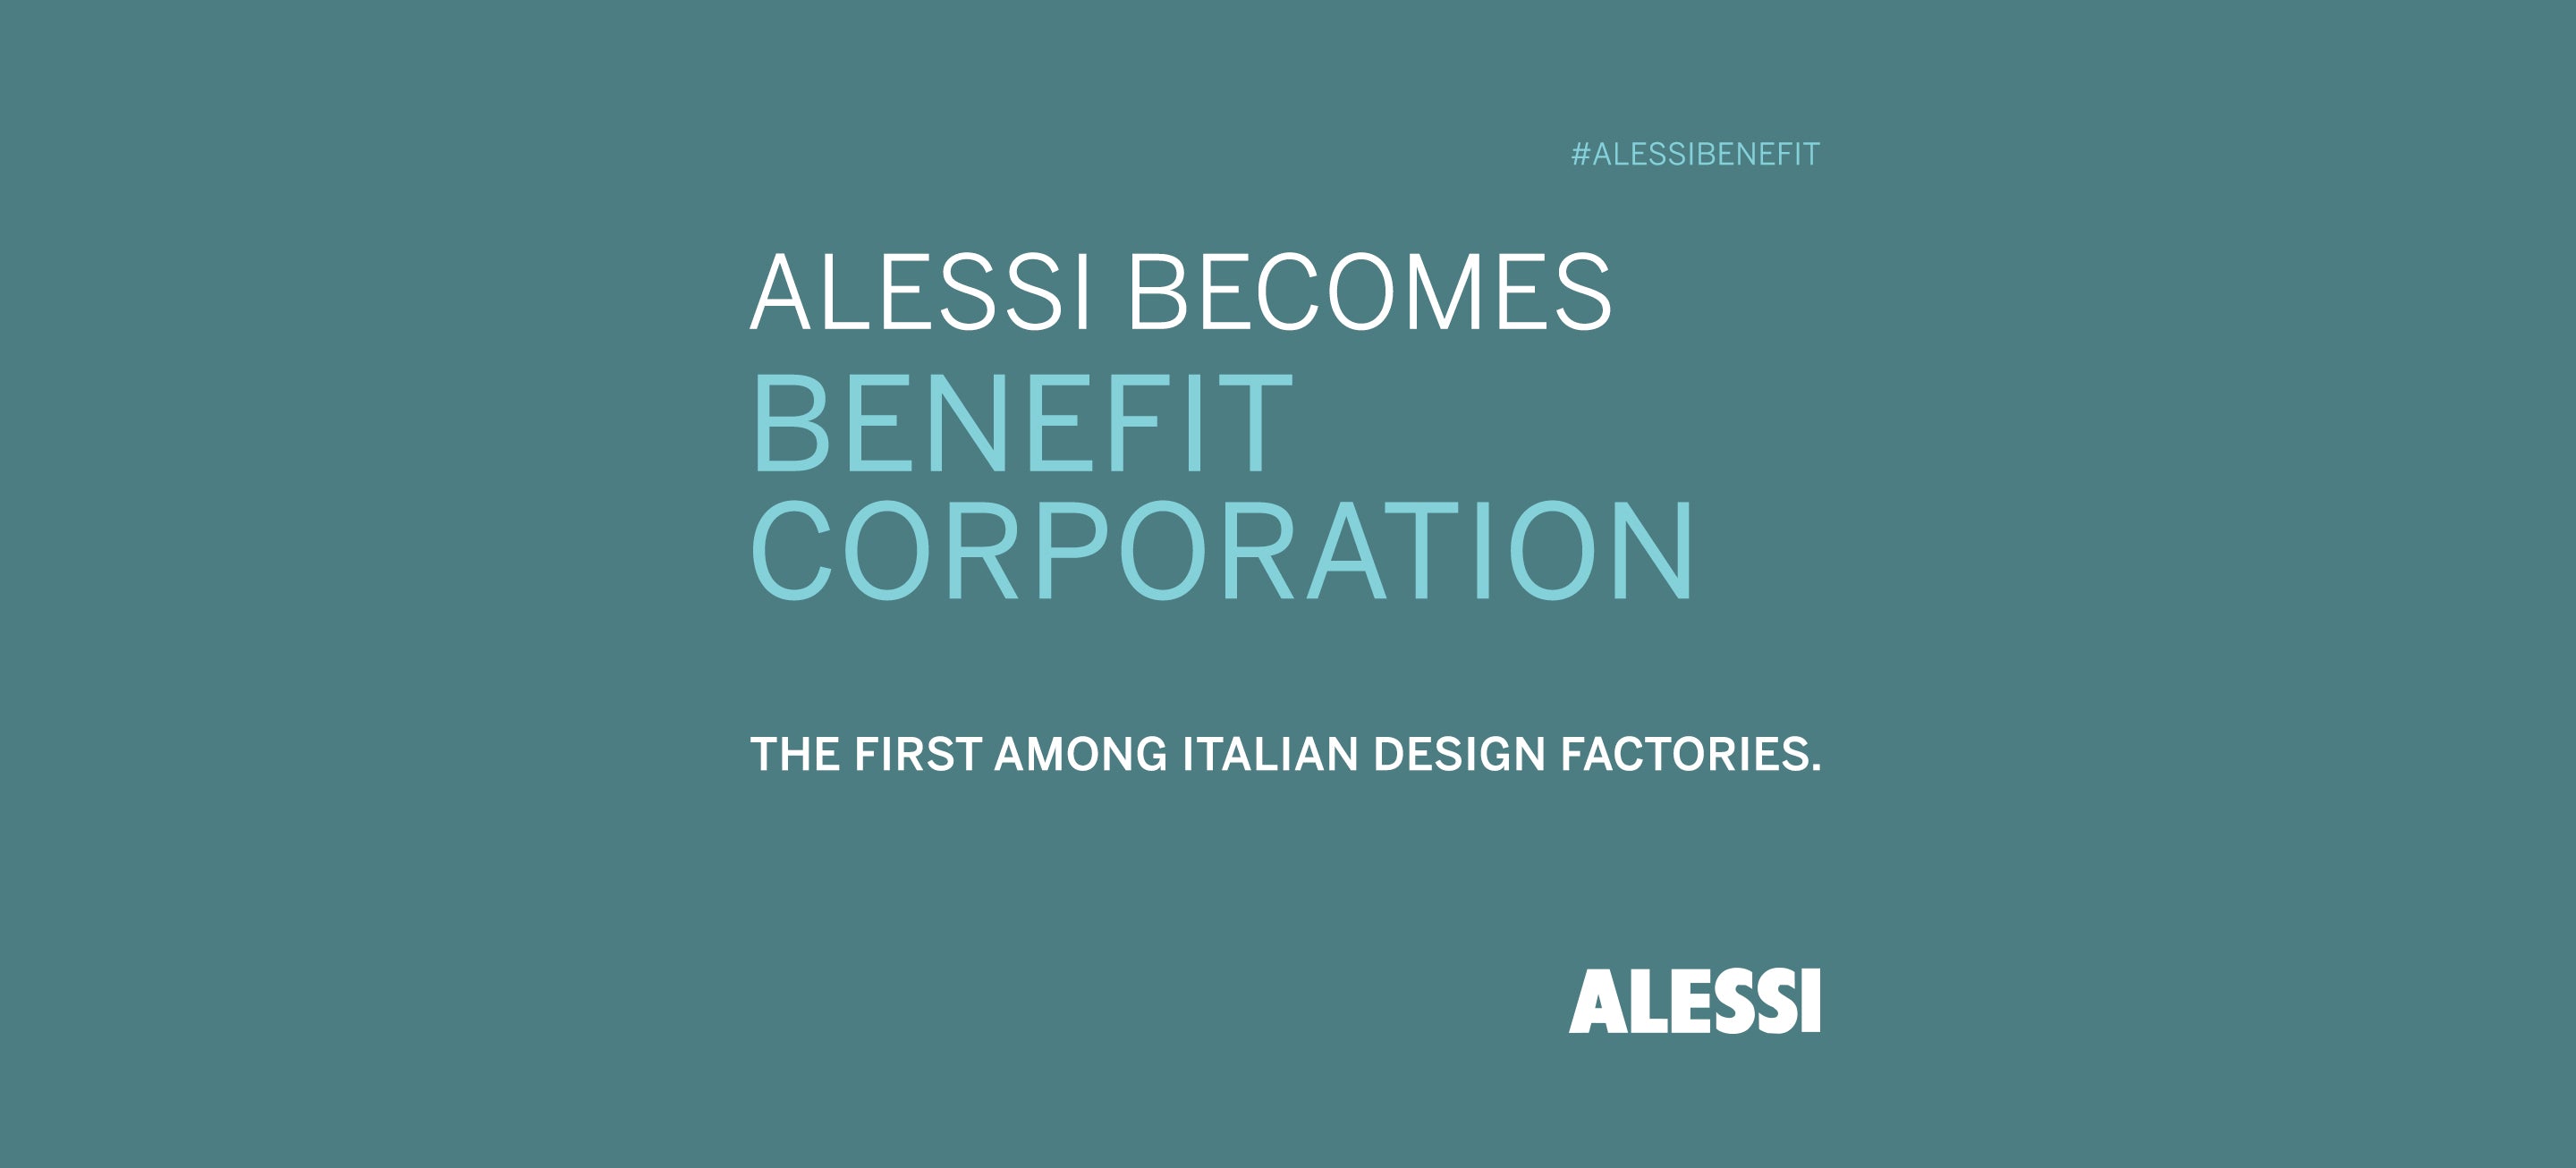 ALESSI BECOMES BENEFIT CORPORATION